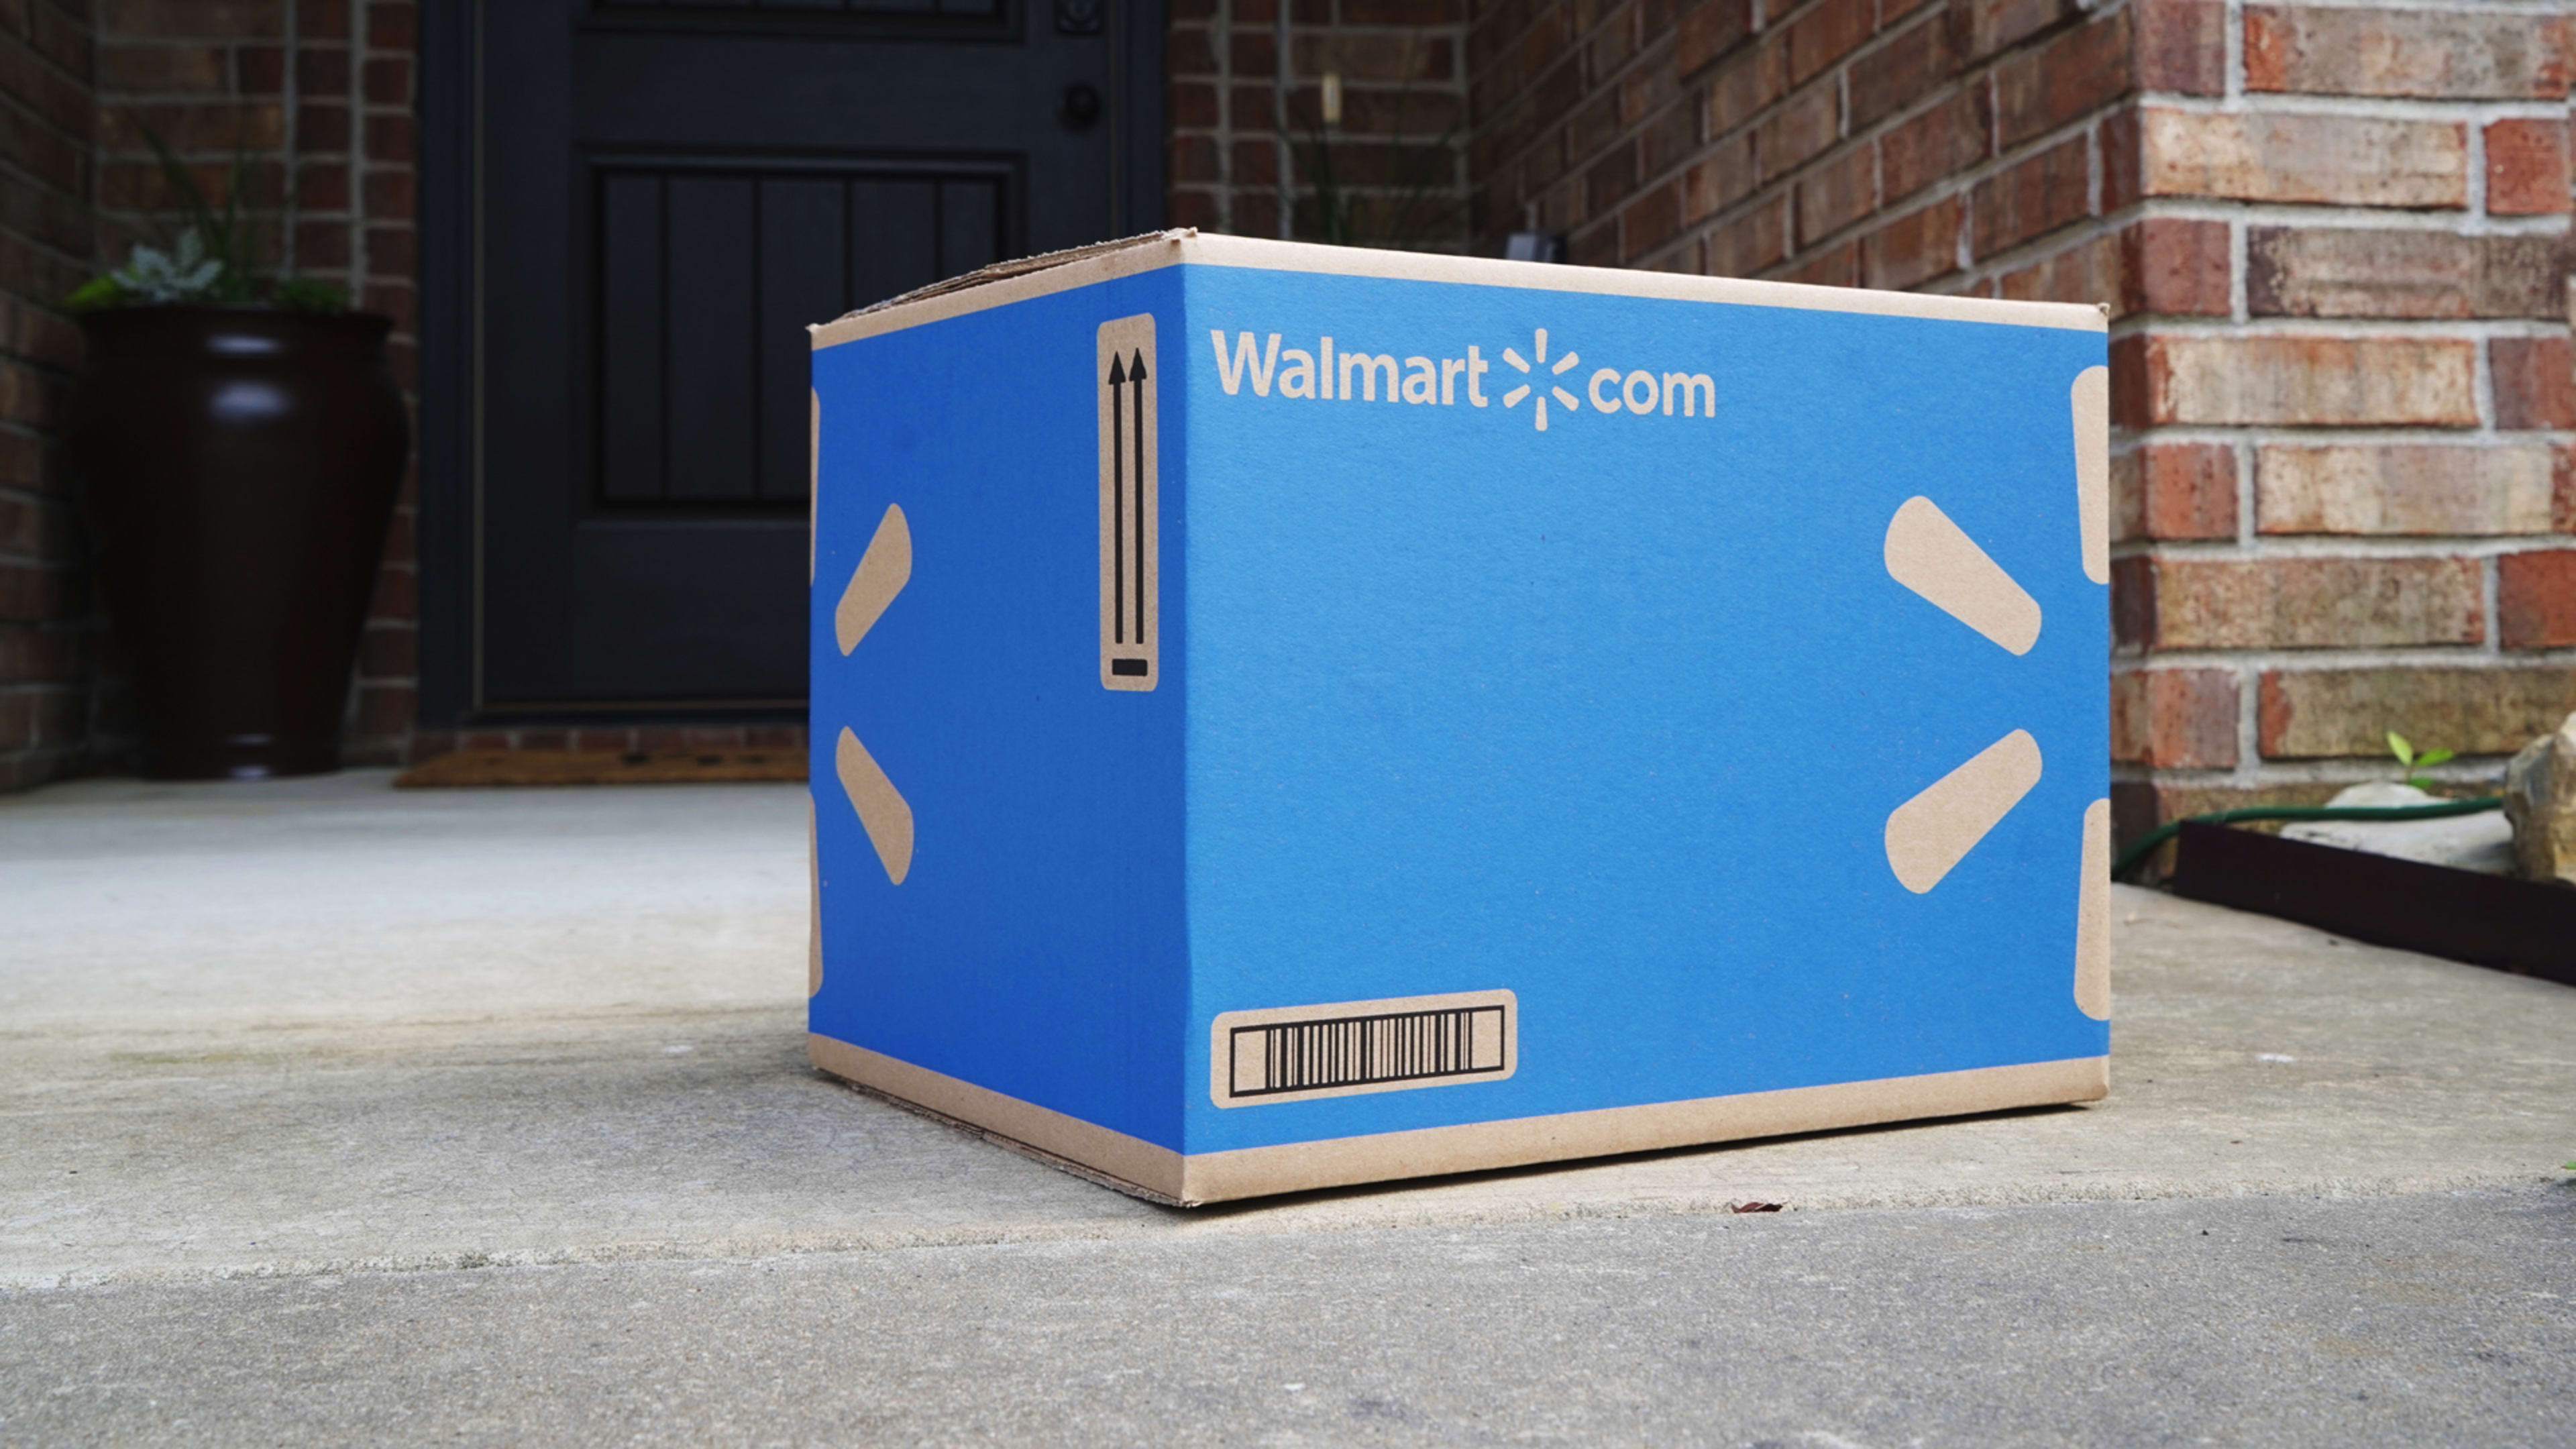 Walmart’s ambitious plan to beat Amazon on free one-day shipping is here